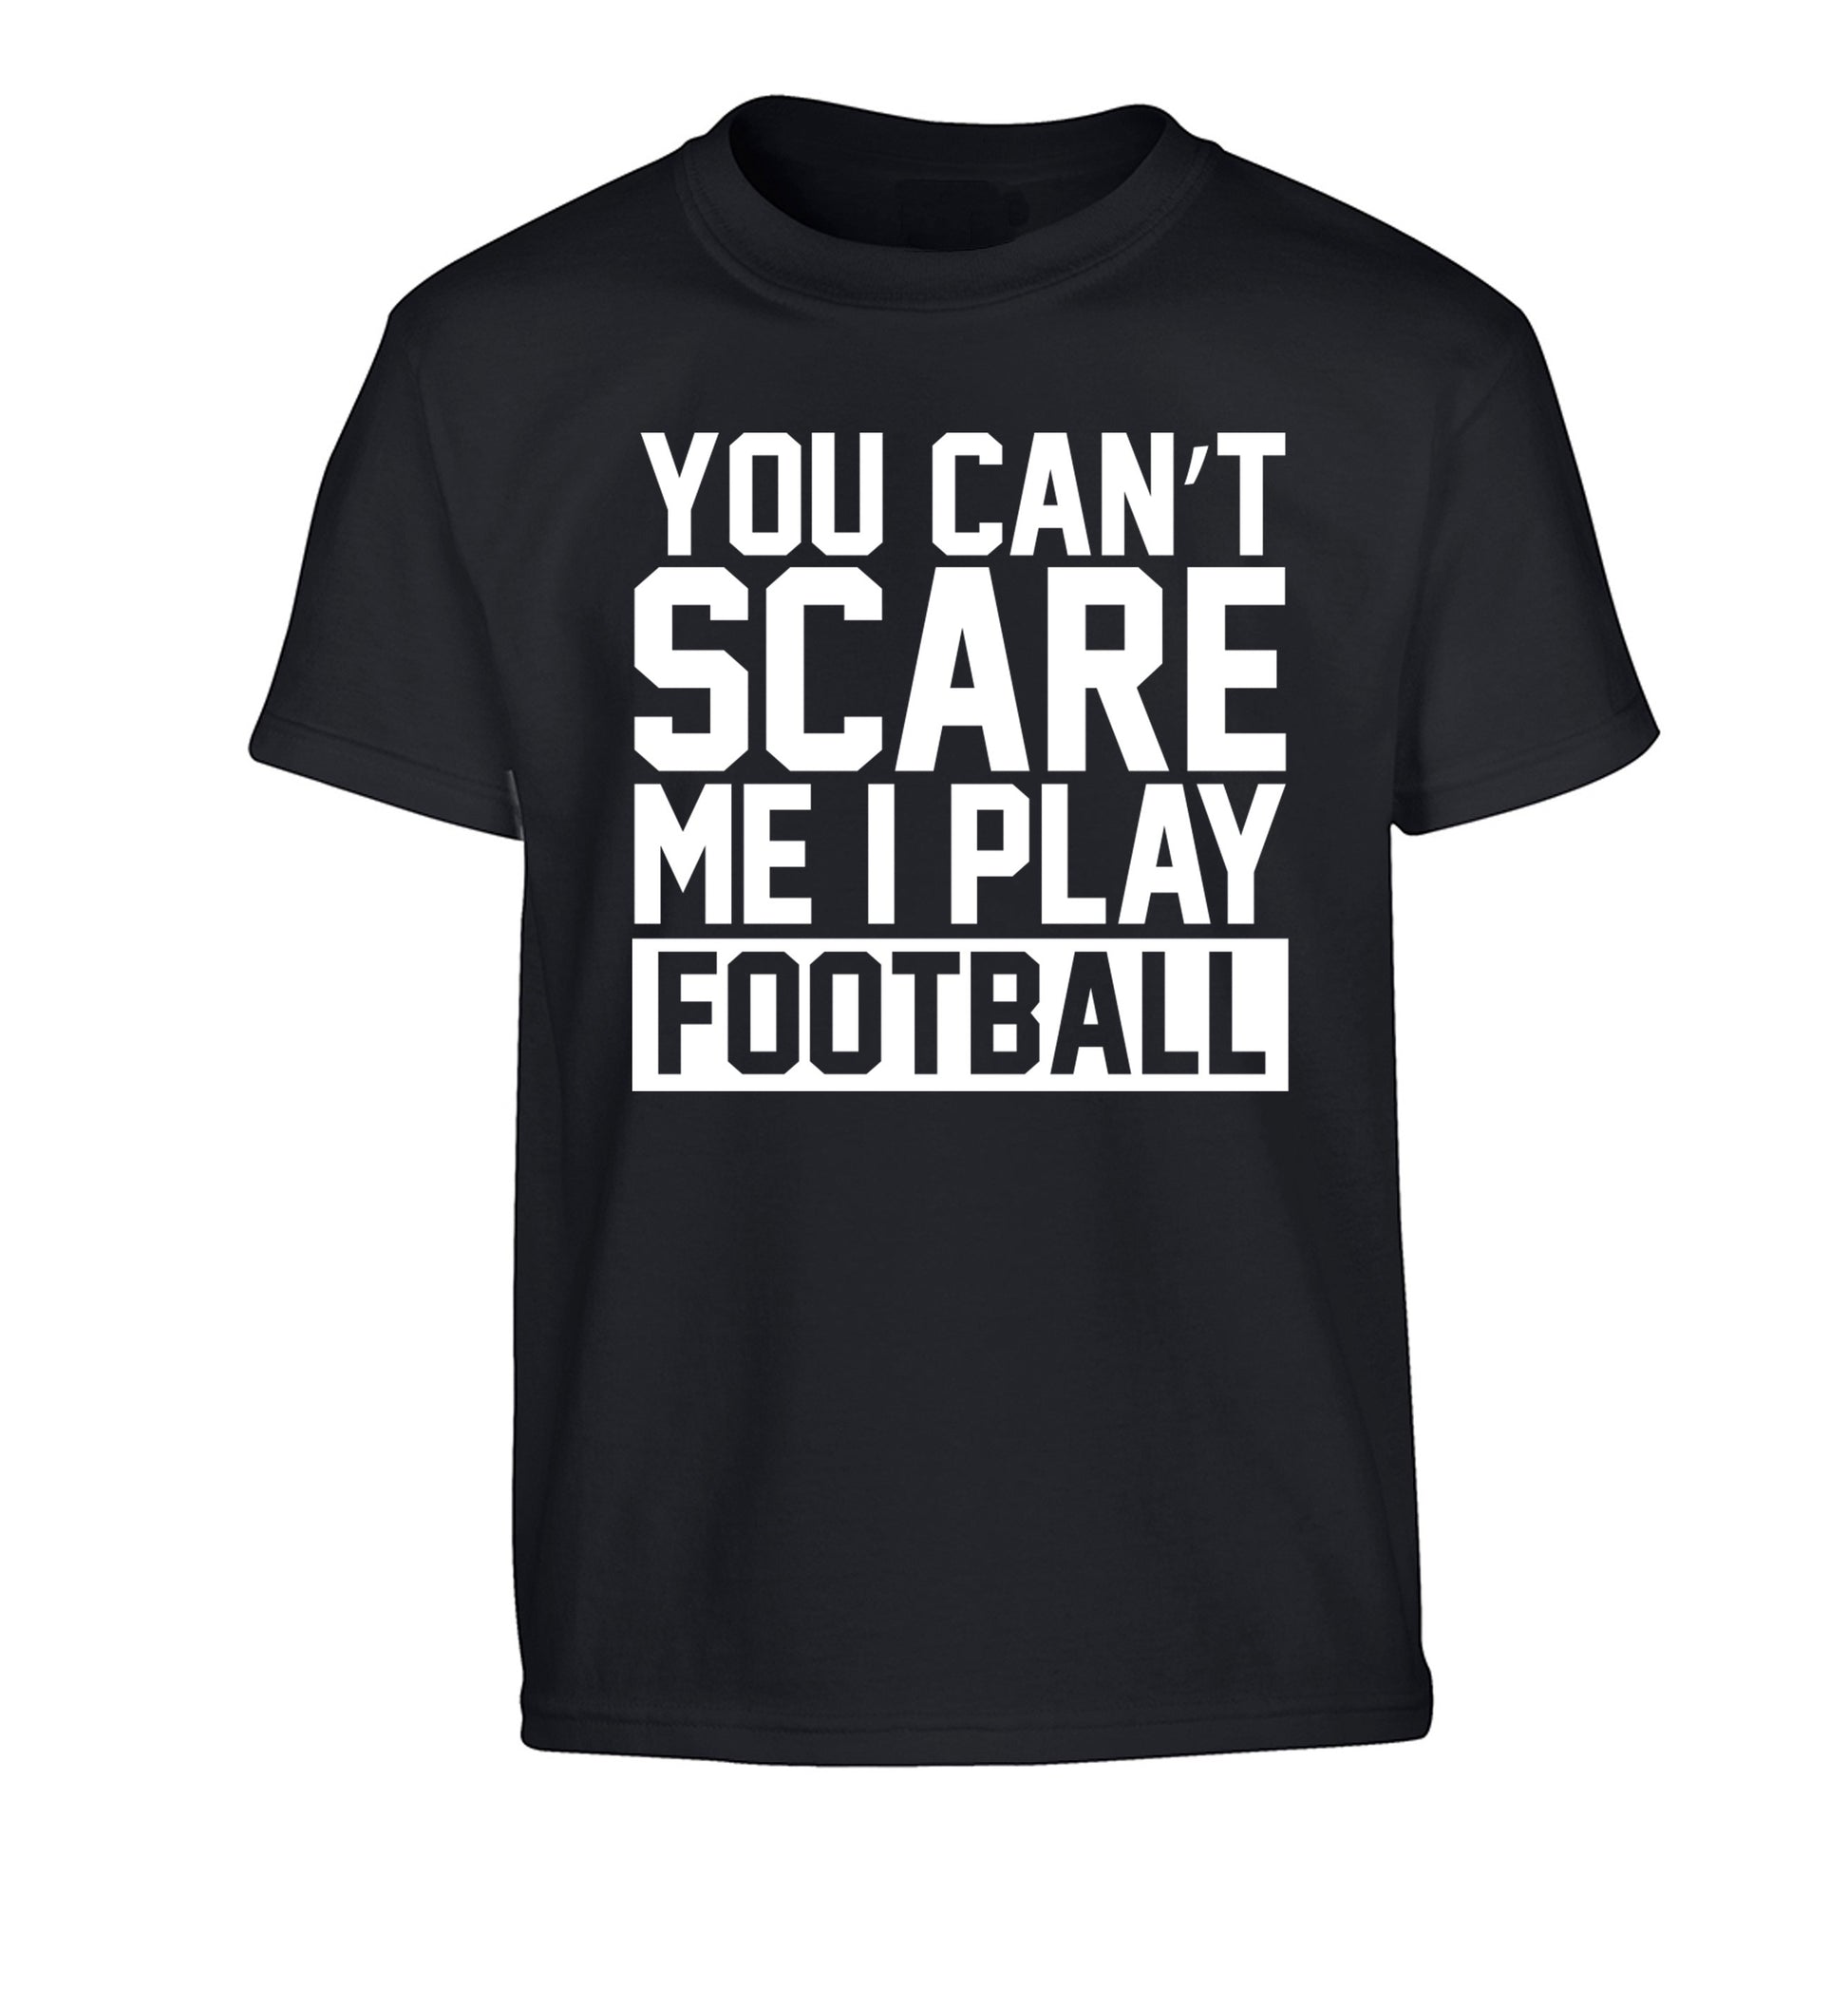 You can't scare me I play football Children's black Tshirt 12-14 Years